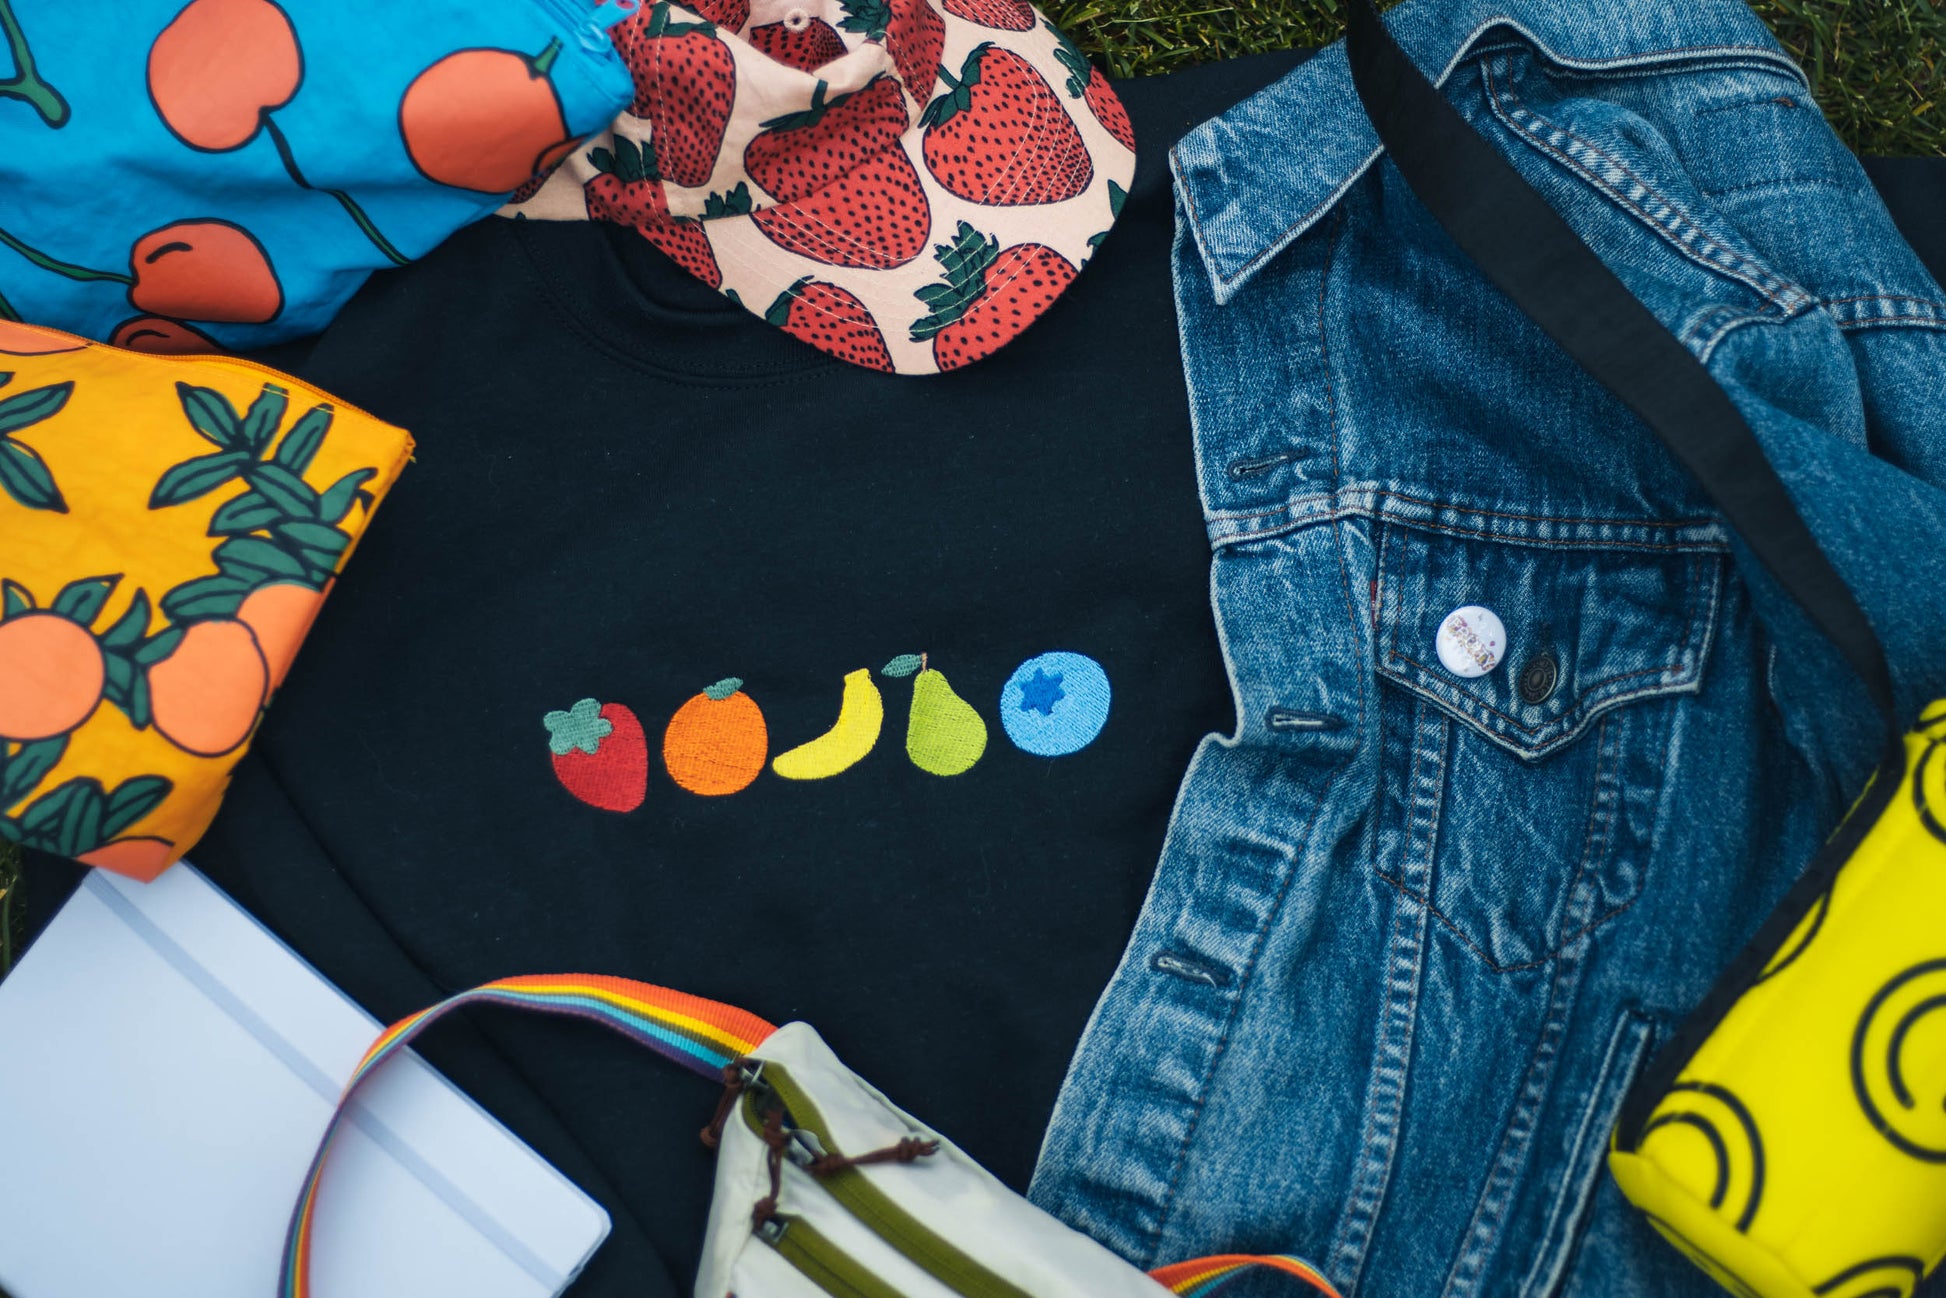 A flatlay picture of the fruity crewneck surrounded by many colorful and fruity items. The fruity crewneck features 5 very simple embroidered fruits. From left to right the fruits are strawberry, orange, banana, pear, and a blueberry. Surrounding the fruity crew neck is a strawberry hat, a jean jacket with a pin, a smiley face bag, a fanny pack with a rainbow strap, a lavender journal, and two fruit themed baggies.